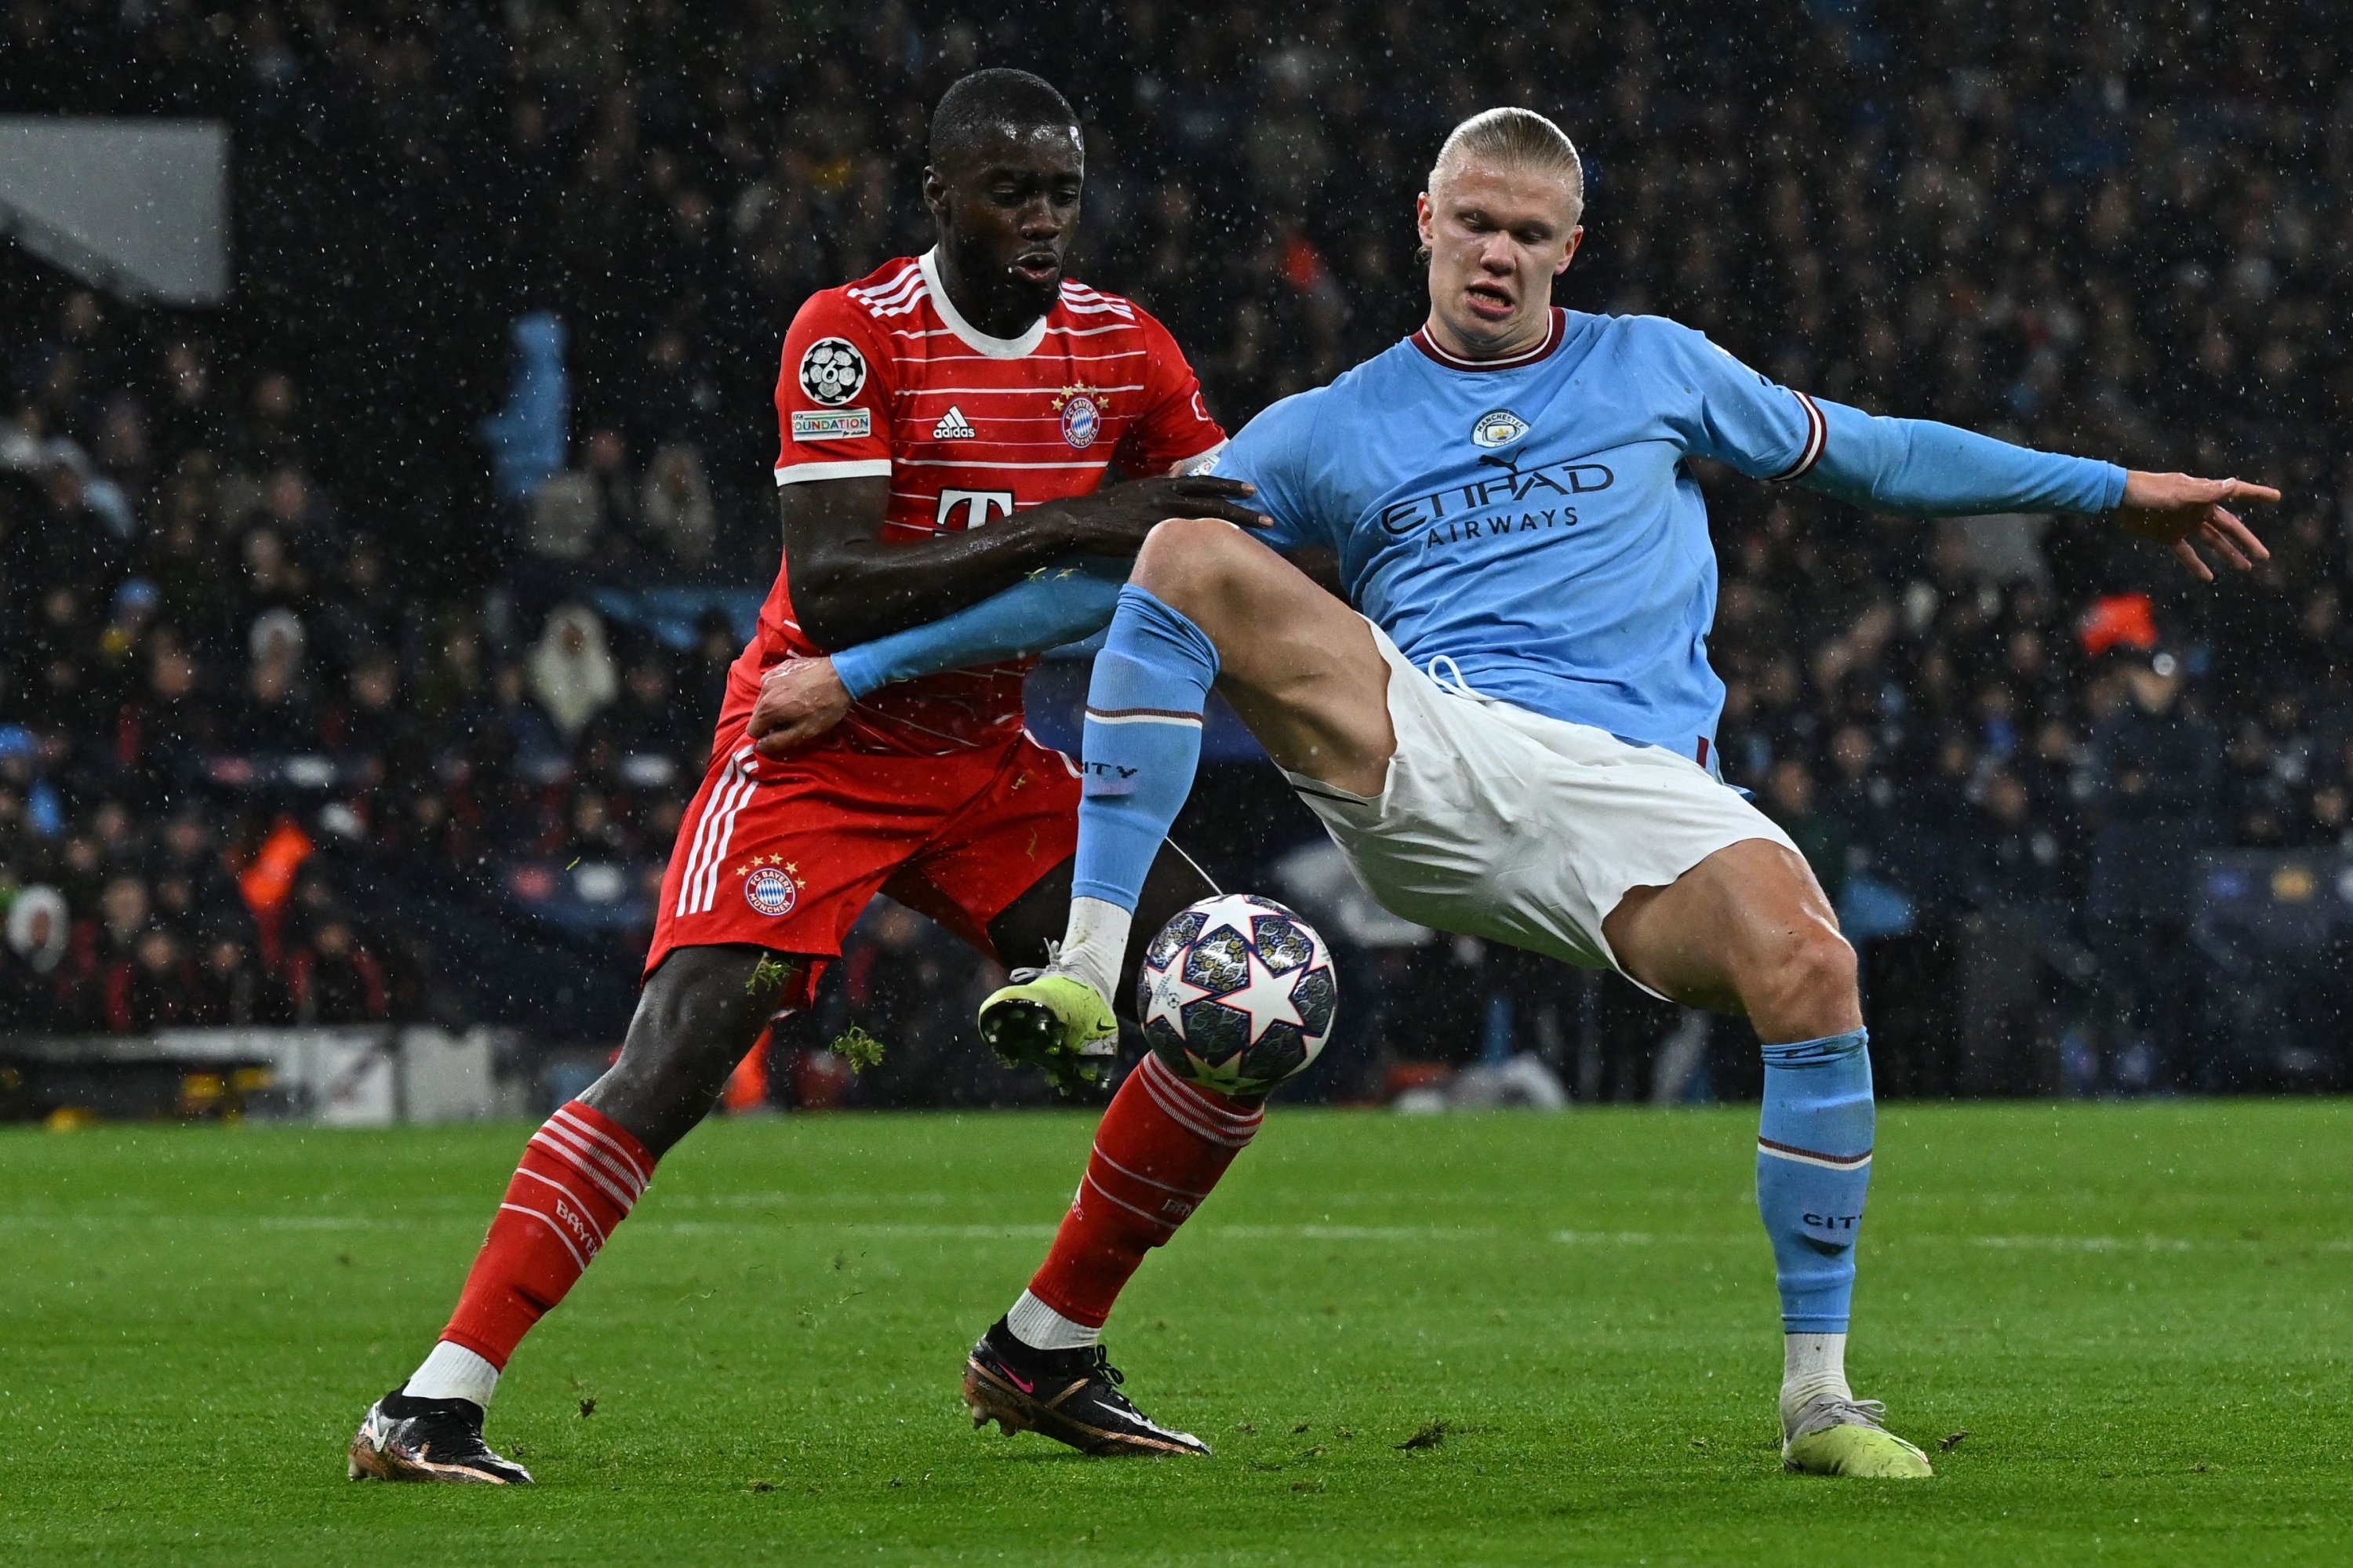 Bayern Munich's French defender Dayot Upamecano (L) vies with Manchester City's Norwegian striker Erling Haaland (R) during the UEFA Champions League quarter final, first leg football match at the Etihad Stadium, Manchester, UK, April 11, 2023. (AFP Photo)